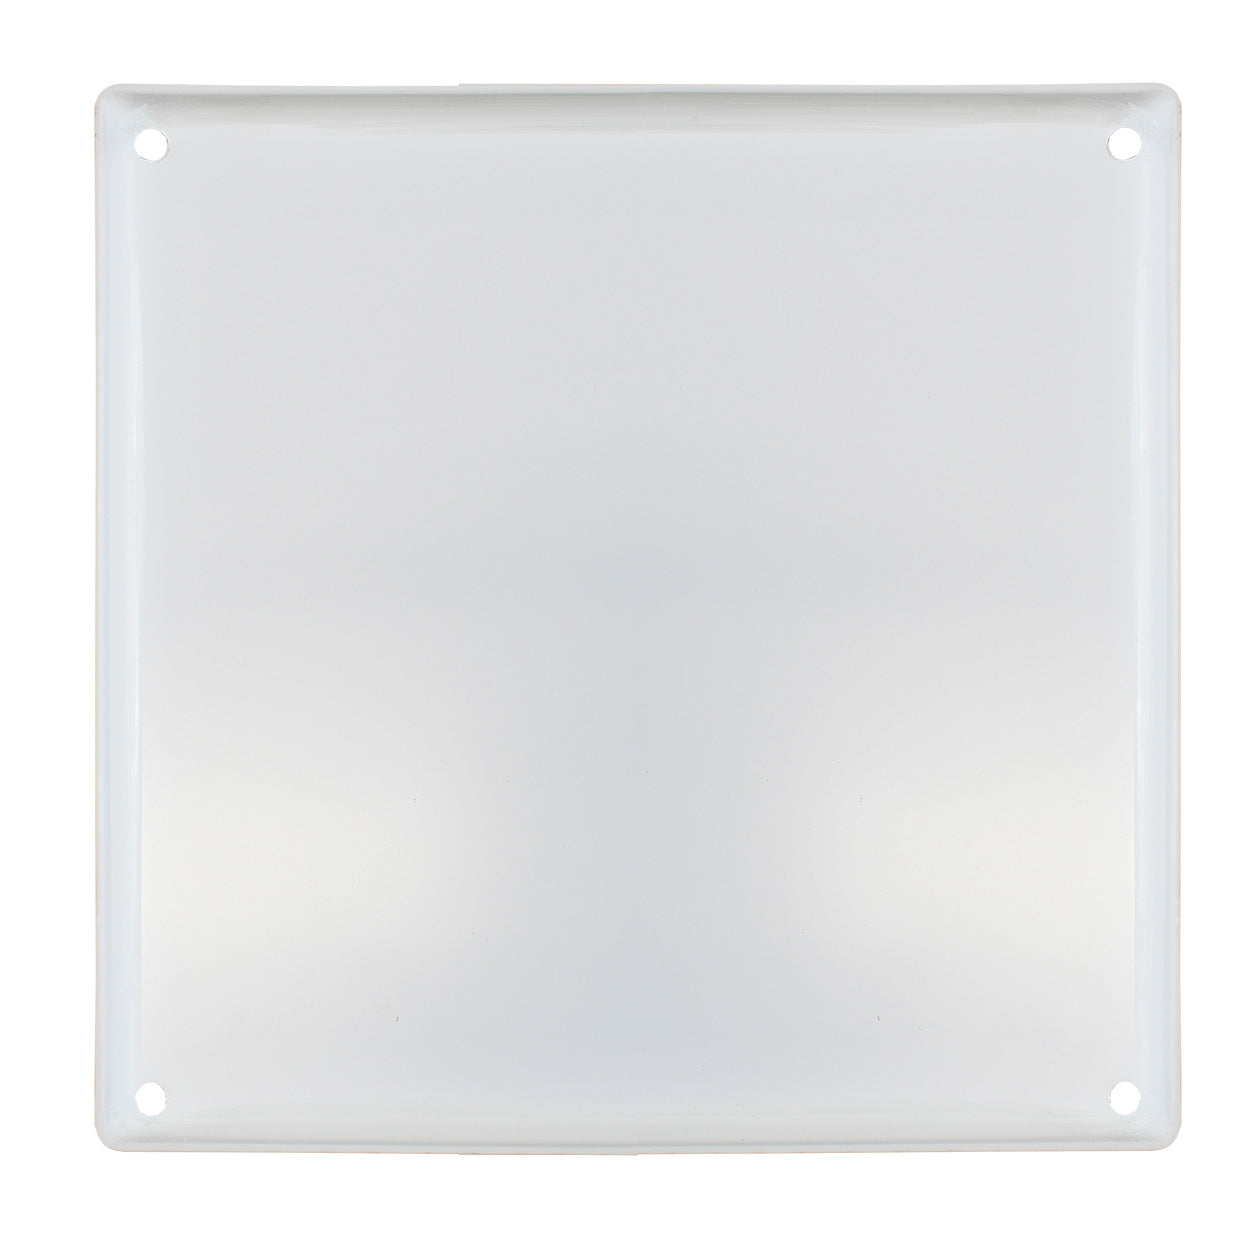 HEKA Contact Warm Plate for Chicks, 30cm x 30cm - optional with Dimmer